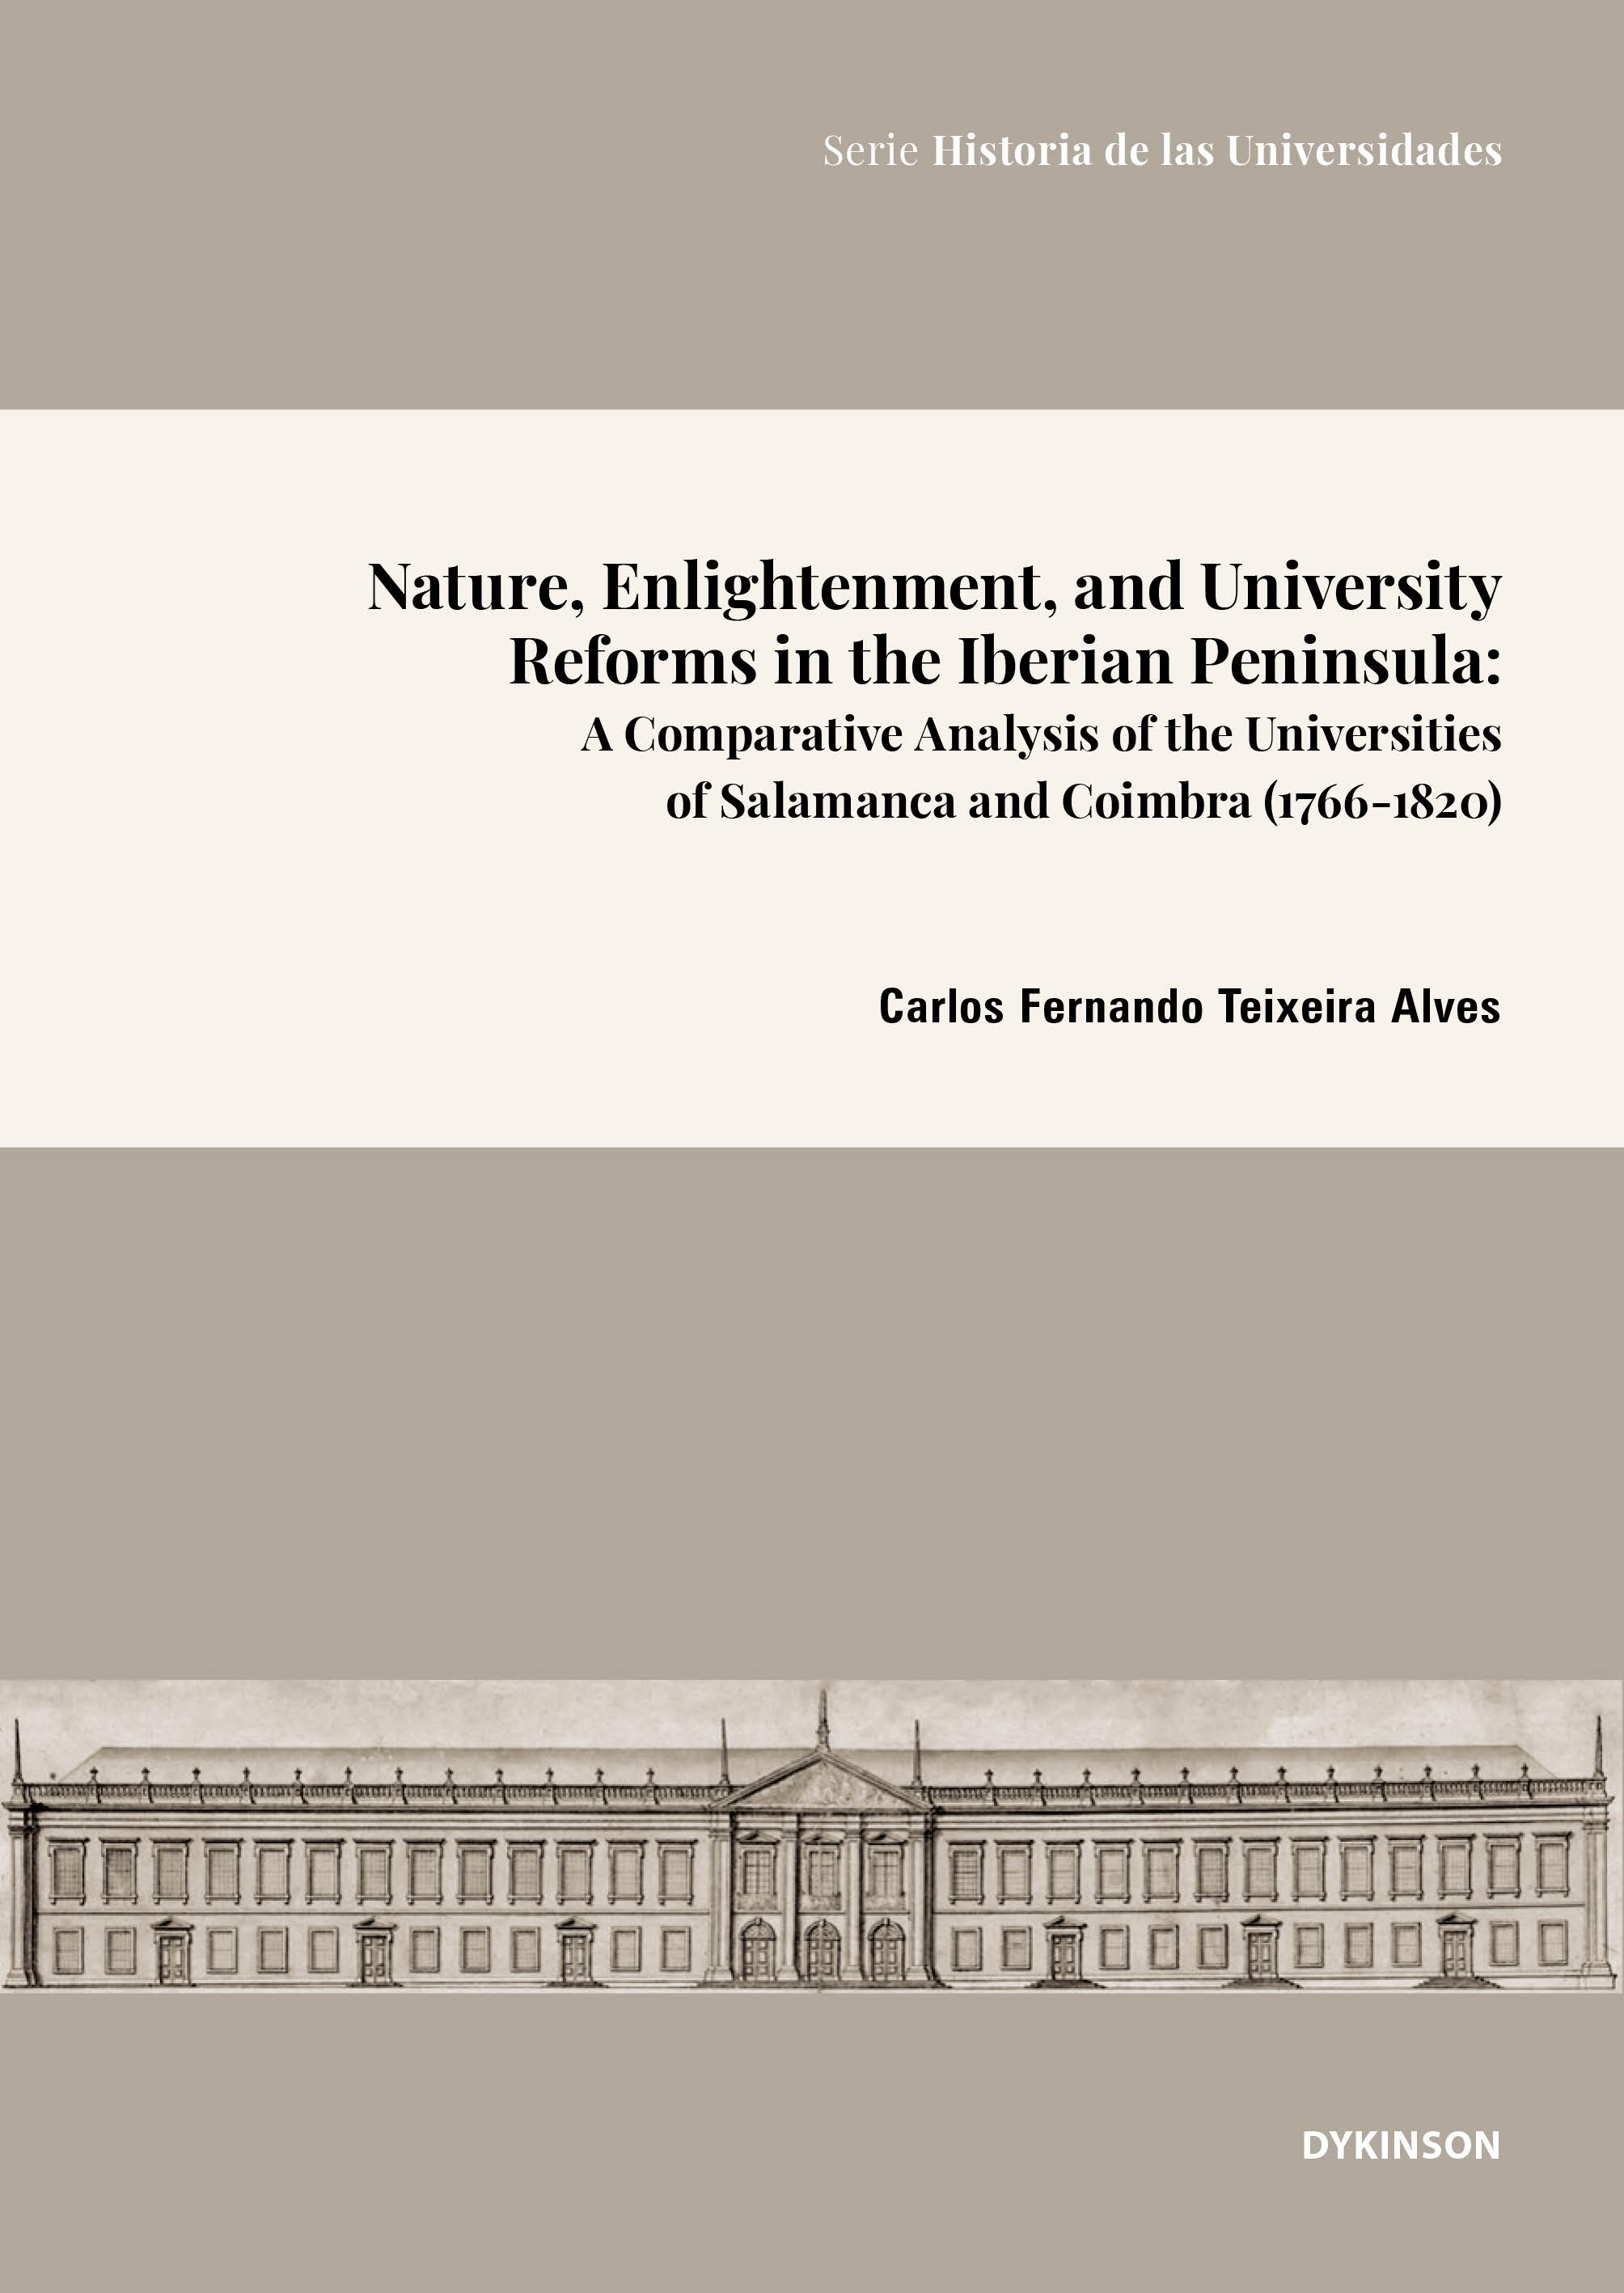 Nature, Enlightenment, and University Reforms in the Iberian Peninsula: A Comparative Analysis of the Universities of Salamanca and Coimbra (1766-1820)